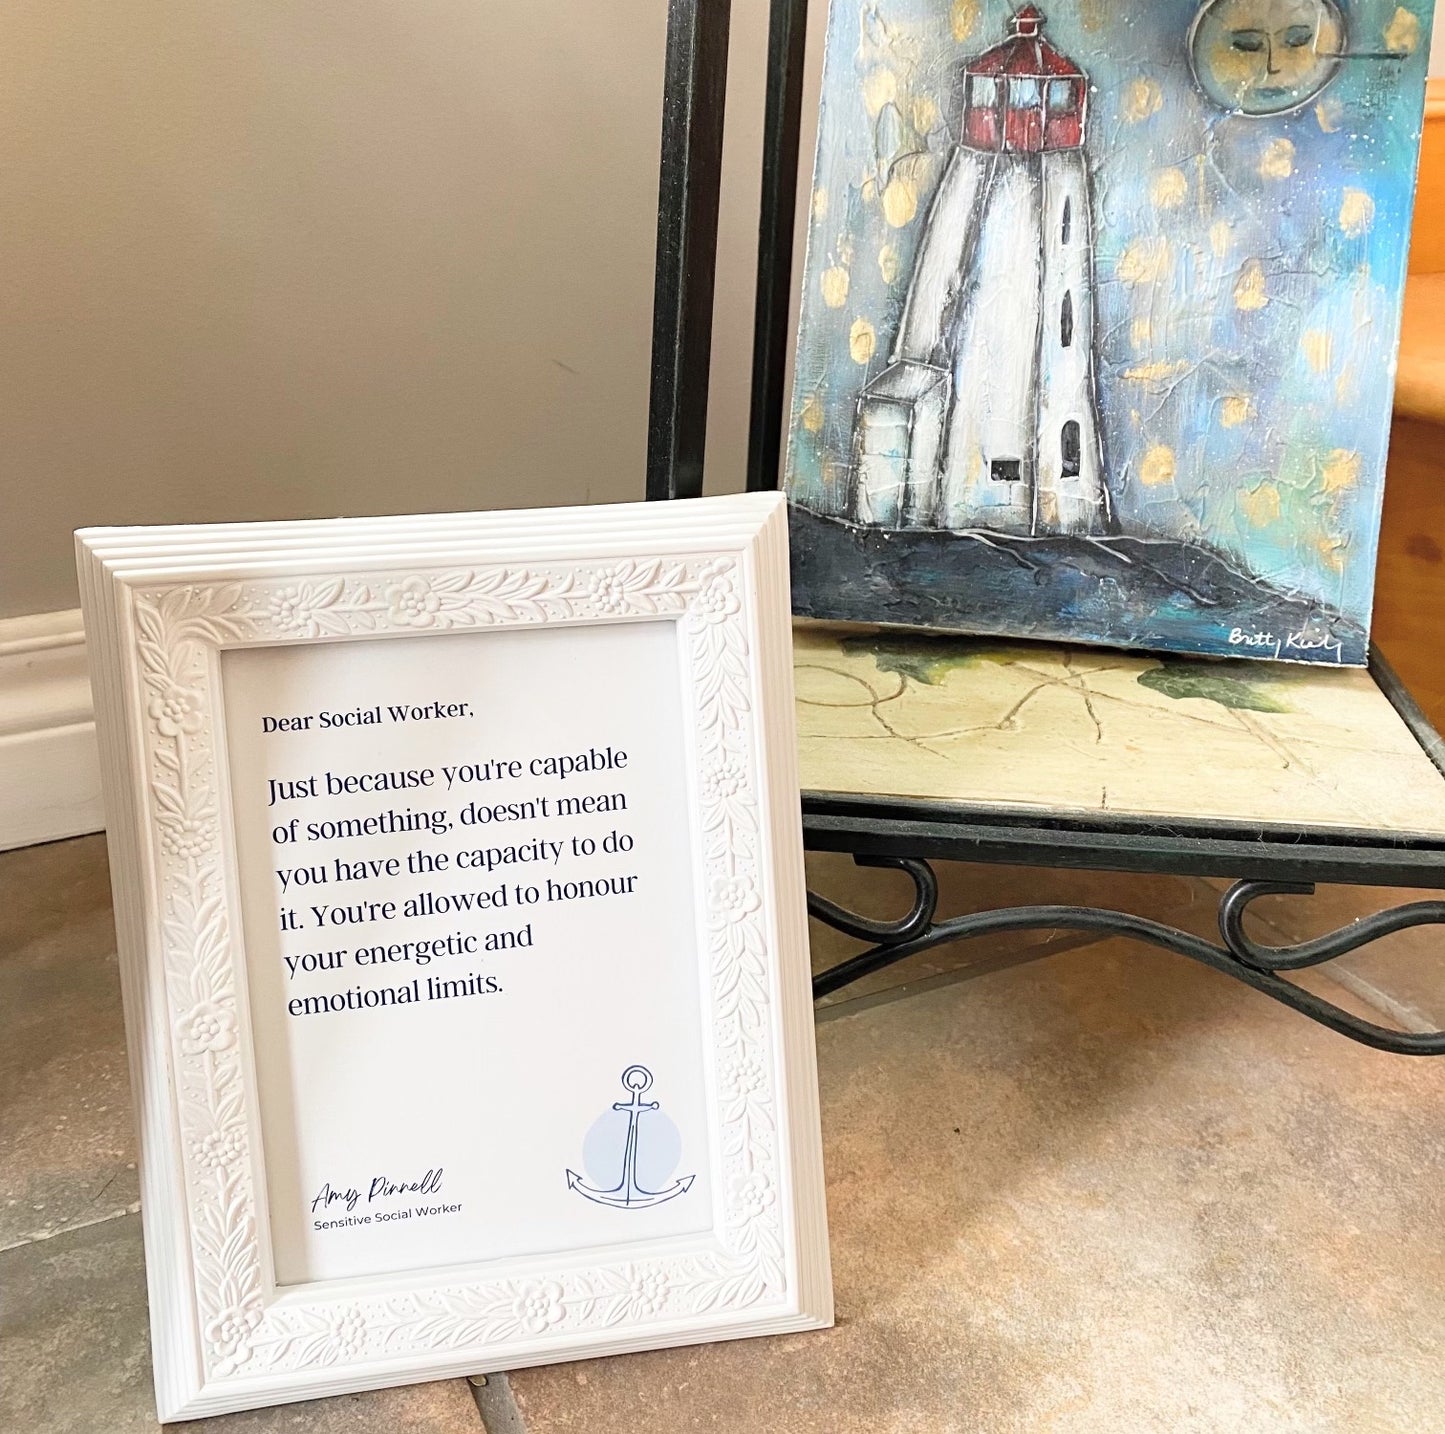 The print is shown in a white frame sitting beside a painting of a lighthouse. The print is white with dark purple font and reads "Dear Social Worker, Just because you're capable of something, doesn't mean you have the capacity to do it. You're allowed to honour your energetic and emotional limits. Amy Pinnell, Sensitive Social Worker". In the bottom right corner of the print is a sketch of a blue anchor.